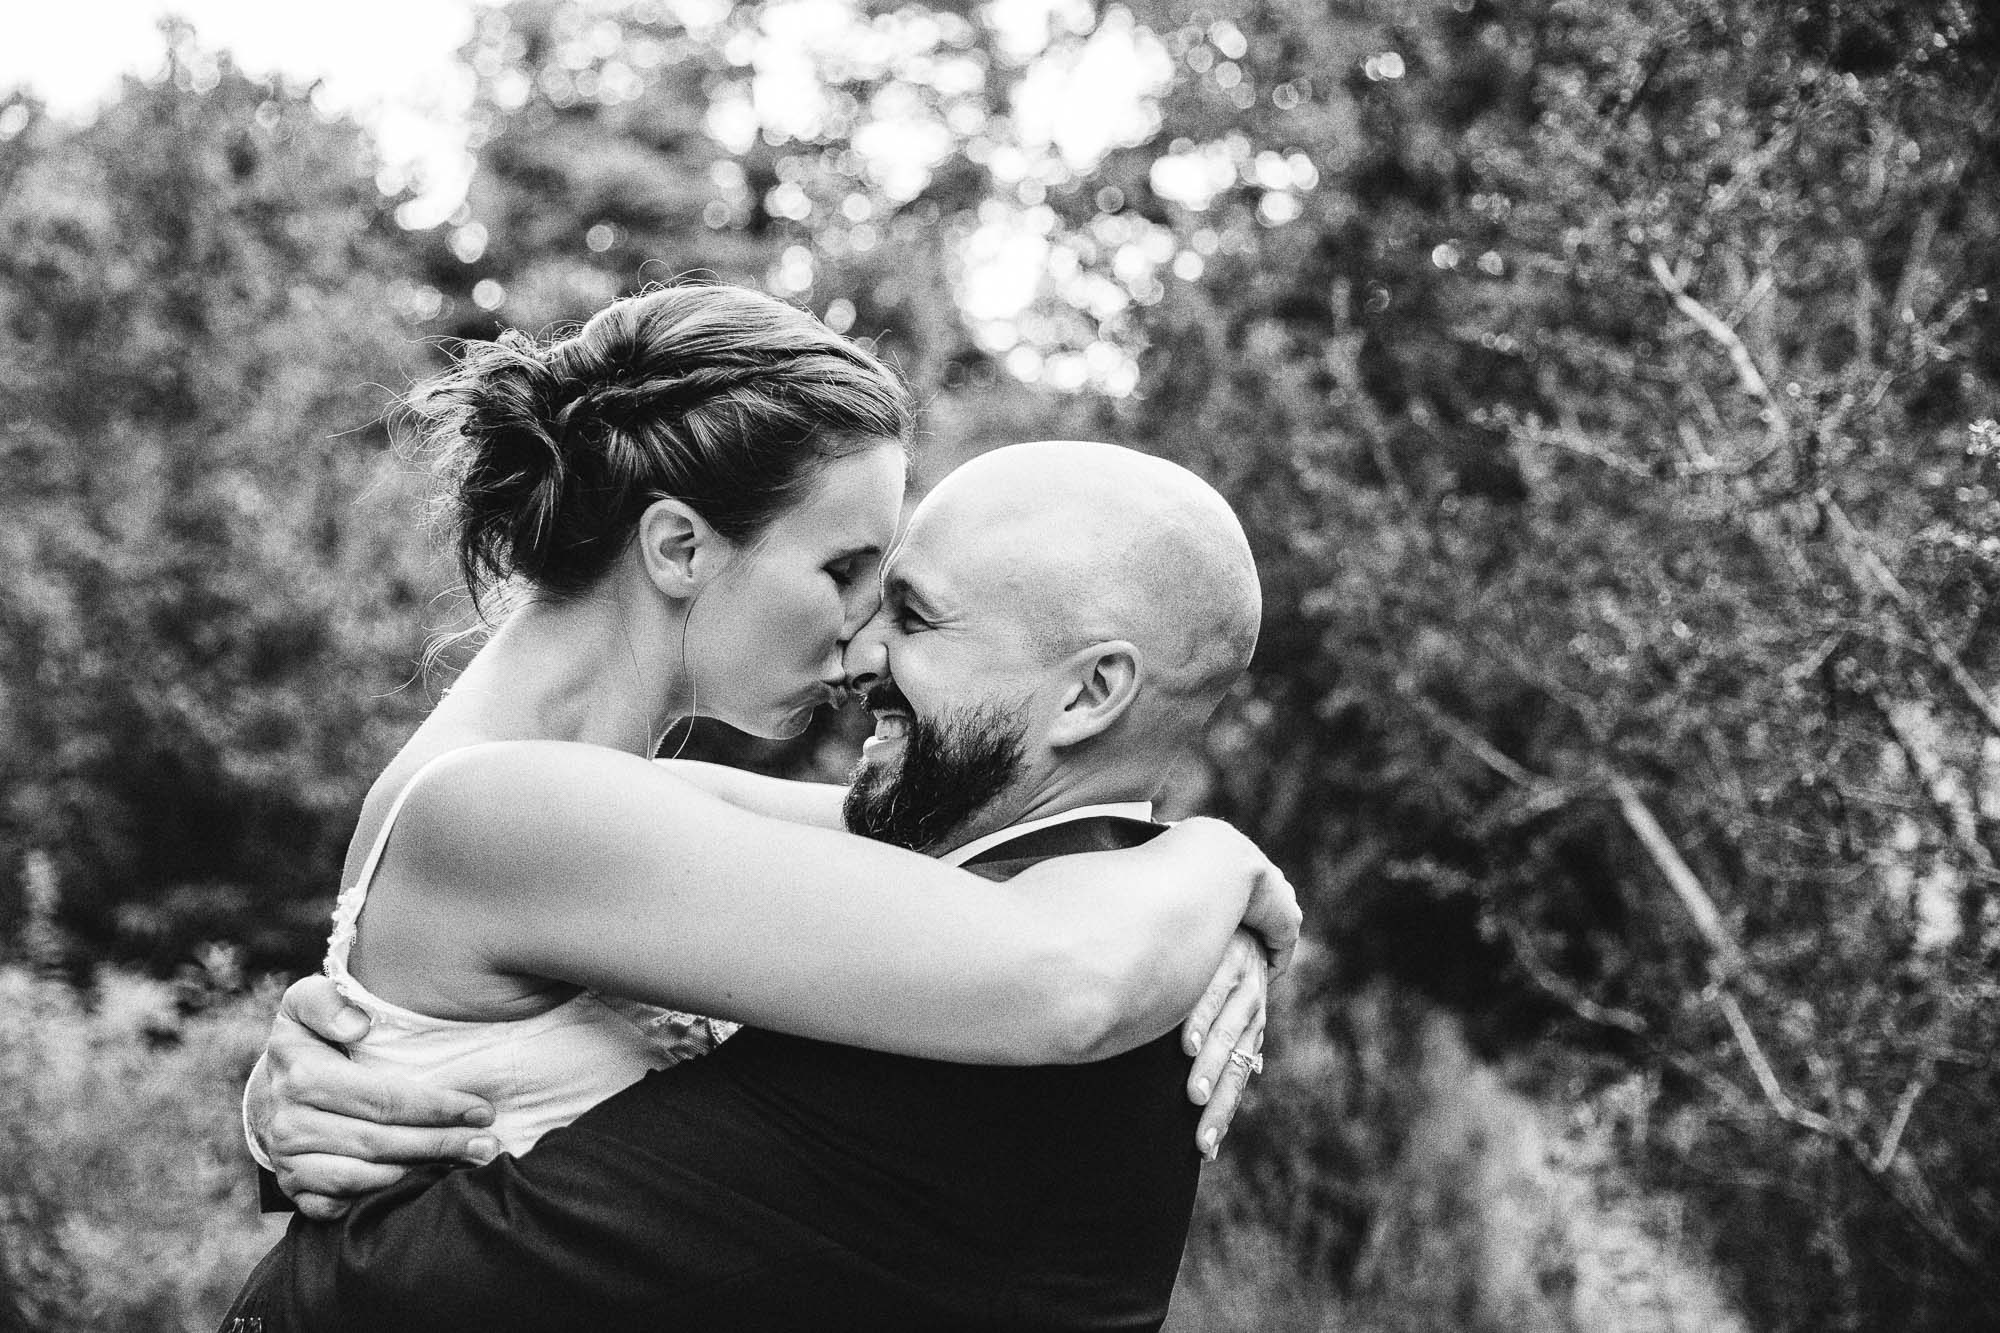 Black and white close-up photo of a bride kissing a groom